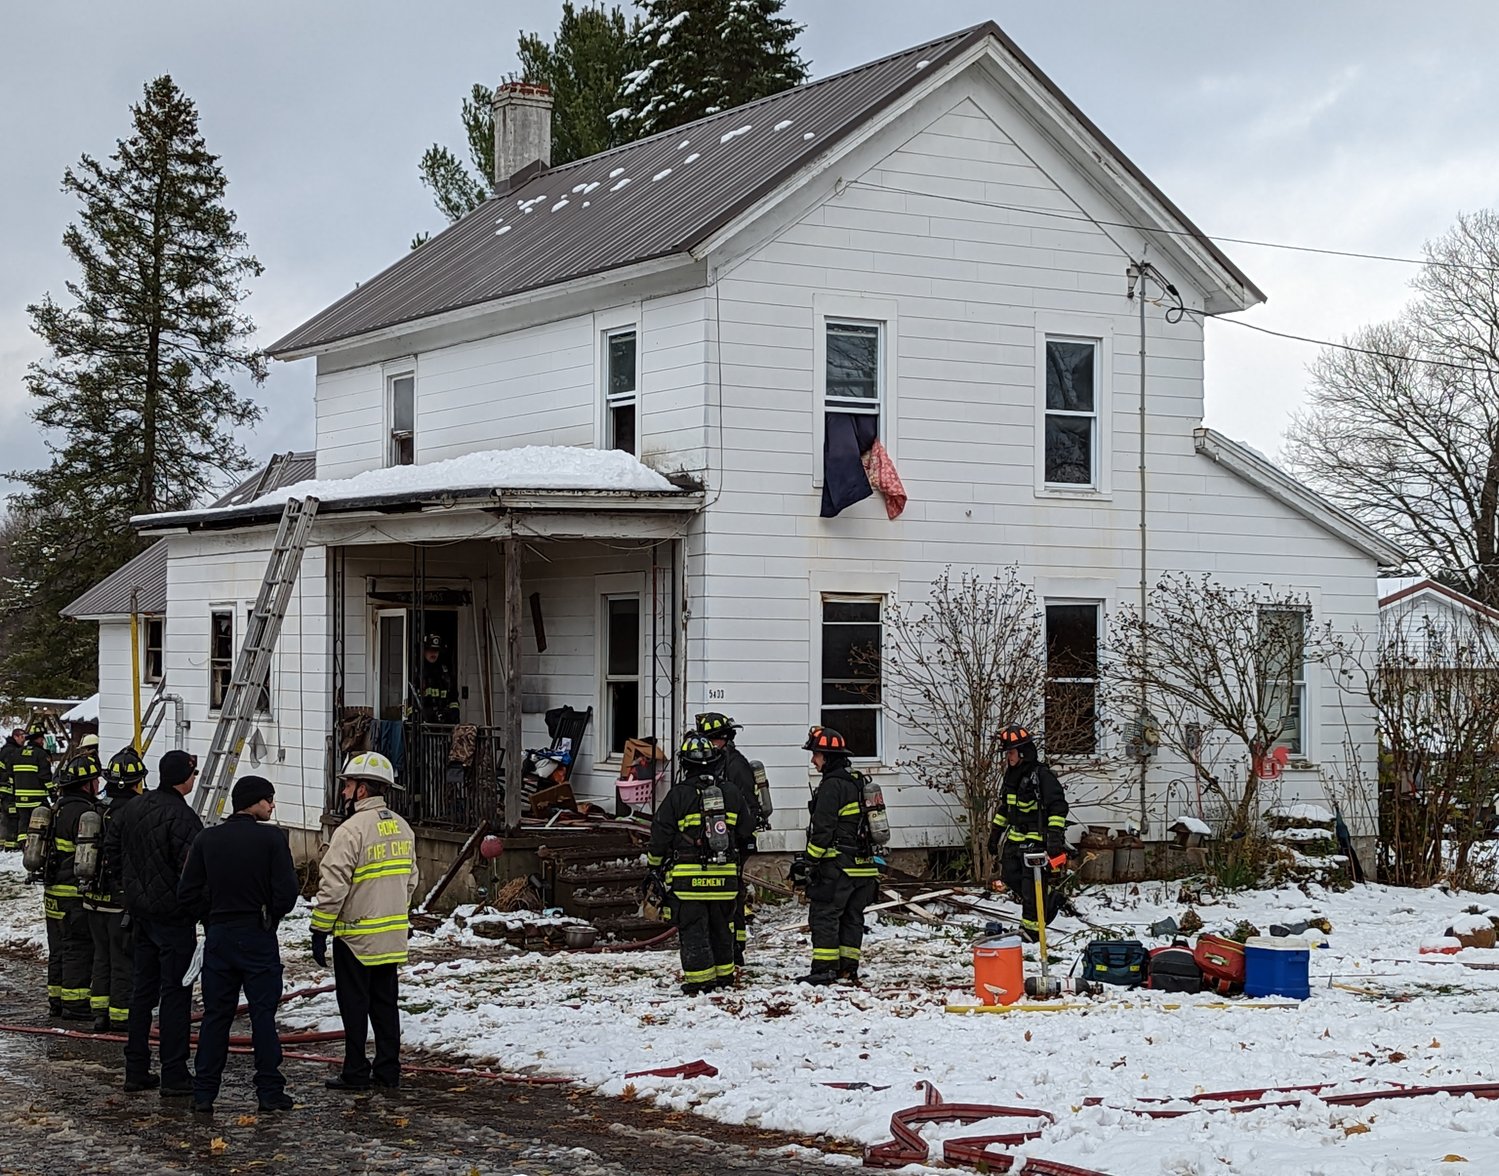 Three dogs were killed in this house fire on Hoag Road in Rome's outer district Thursday morning, according to the Rome Fire Department. The fire is believed to have started in the living room on the first floor. No people were injured.